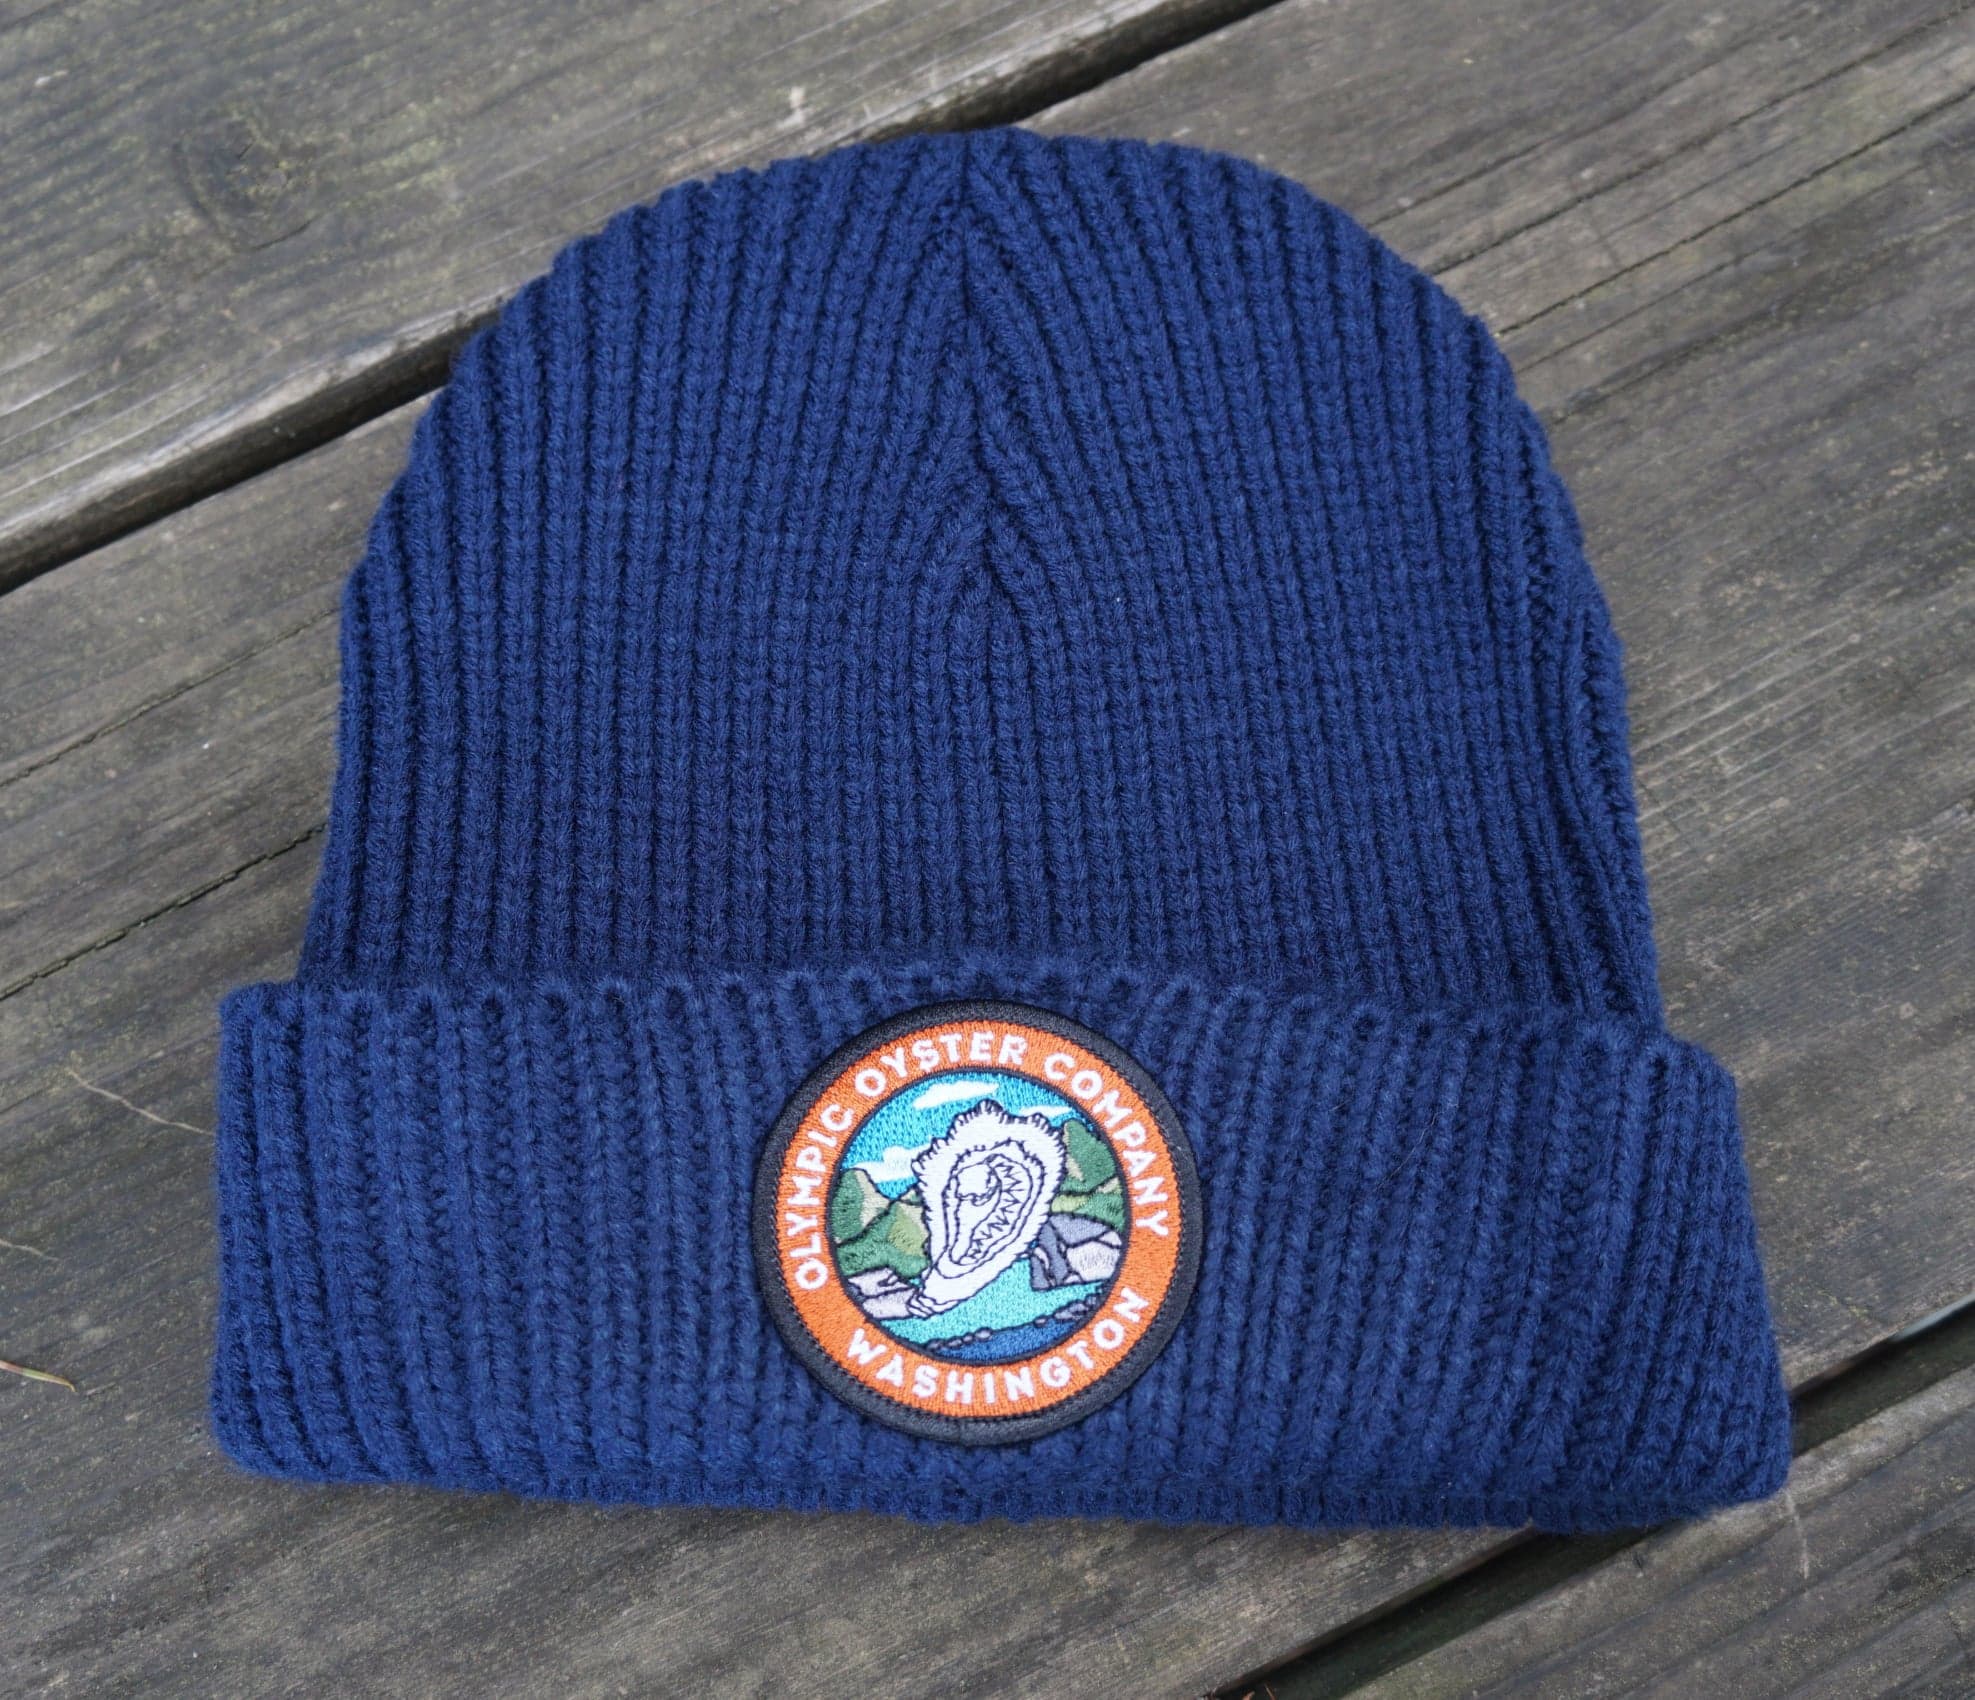 Olympic Oyster Co. Cuffed Knit Beanie